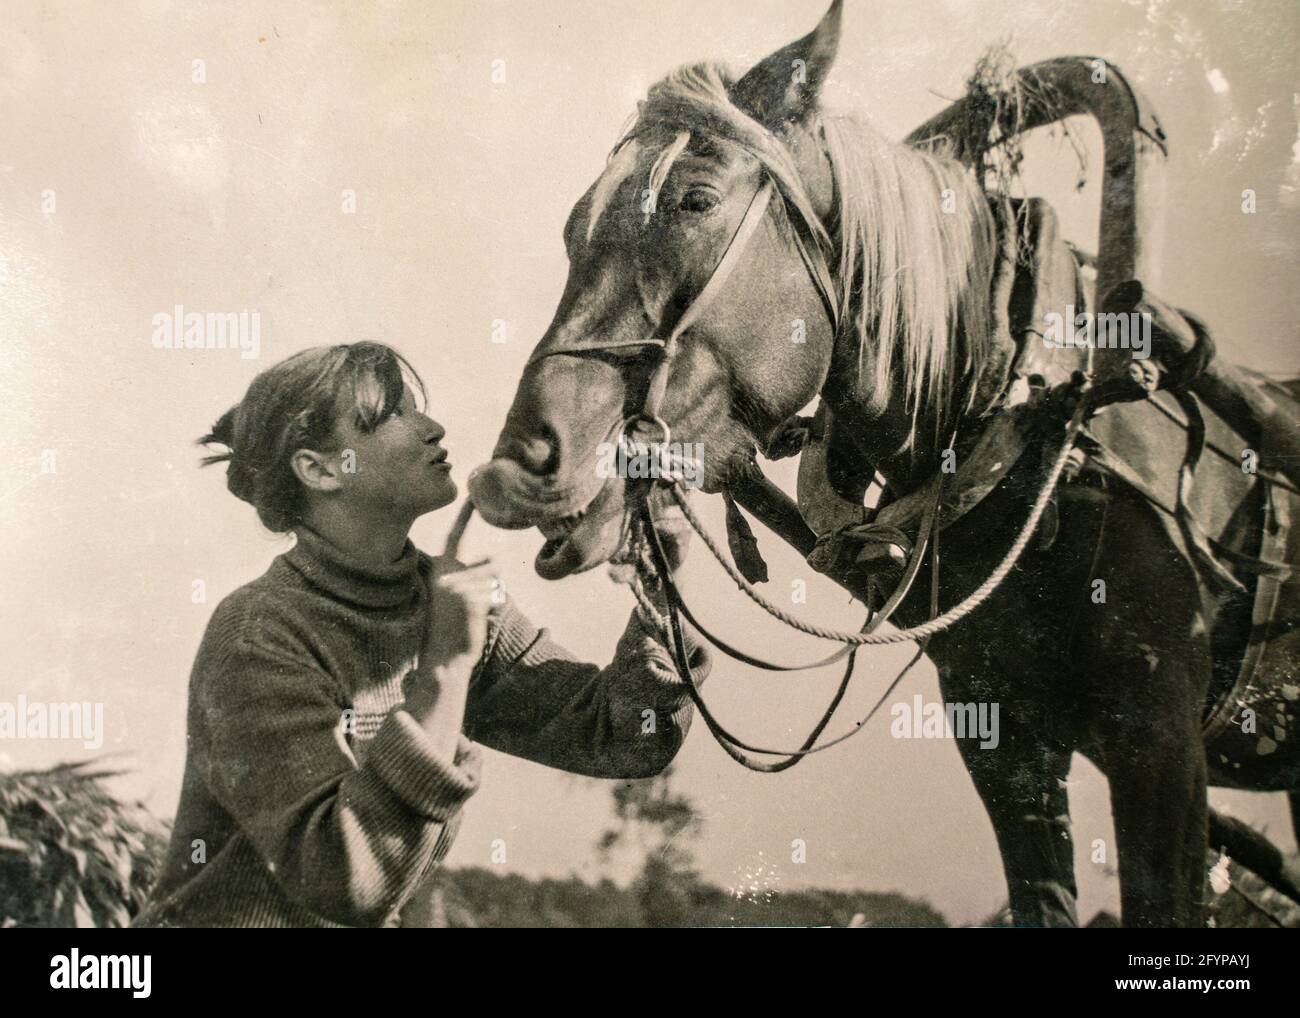 Germany - CIRCA 1930s: Female farmer and horse working on grain harvest. Shocks of grain in a field. Archive vintage black and white photography Stock Photo